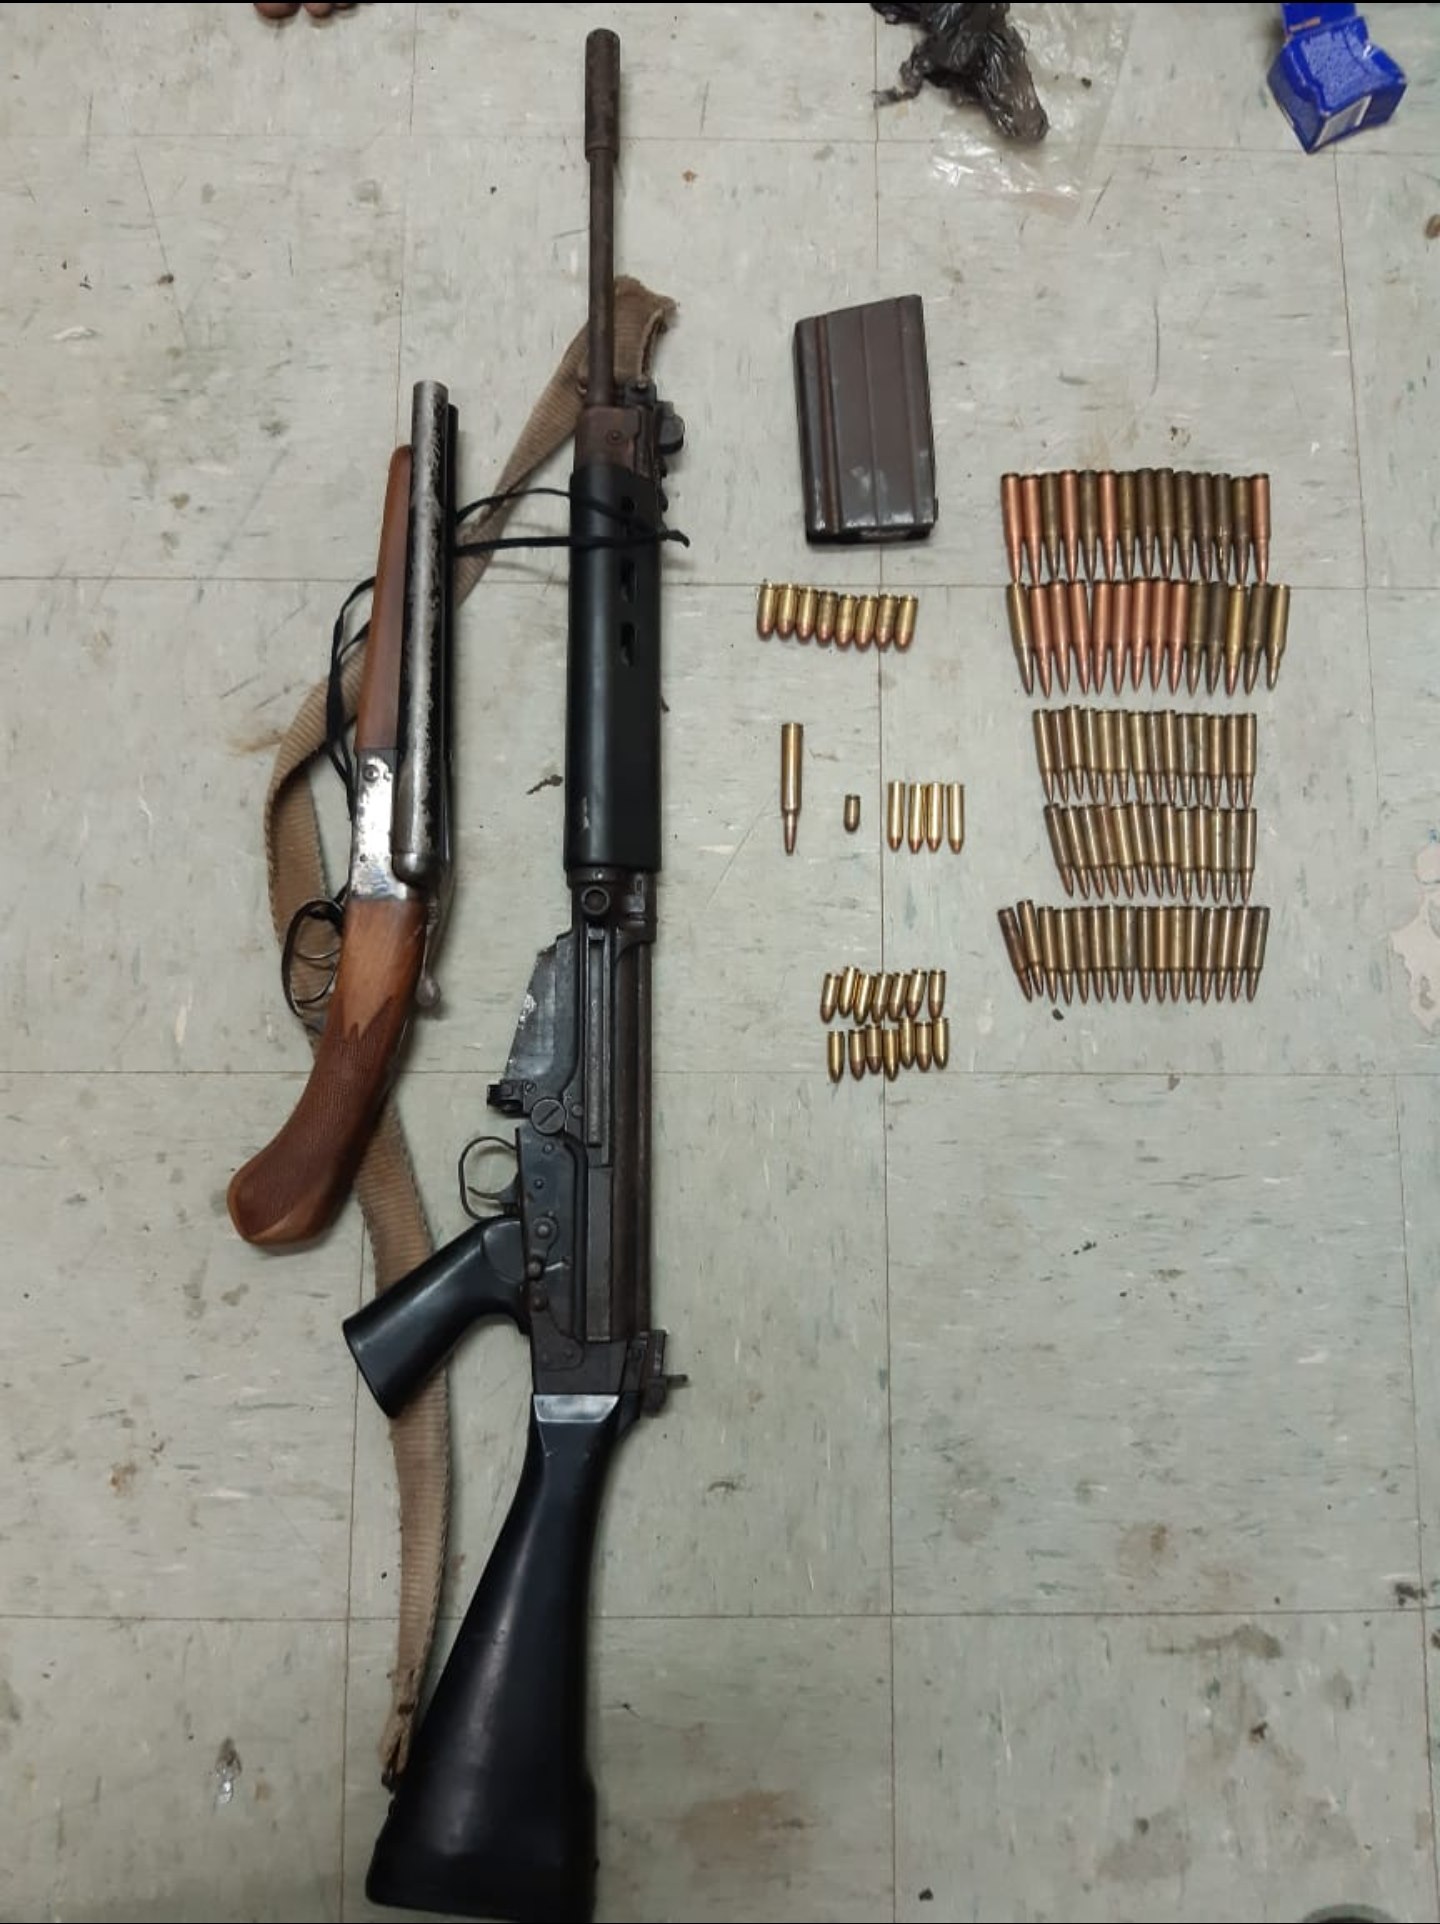 Three firearms and 102 rounds of ammunitions recovered